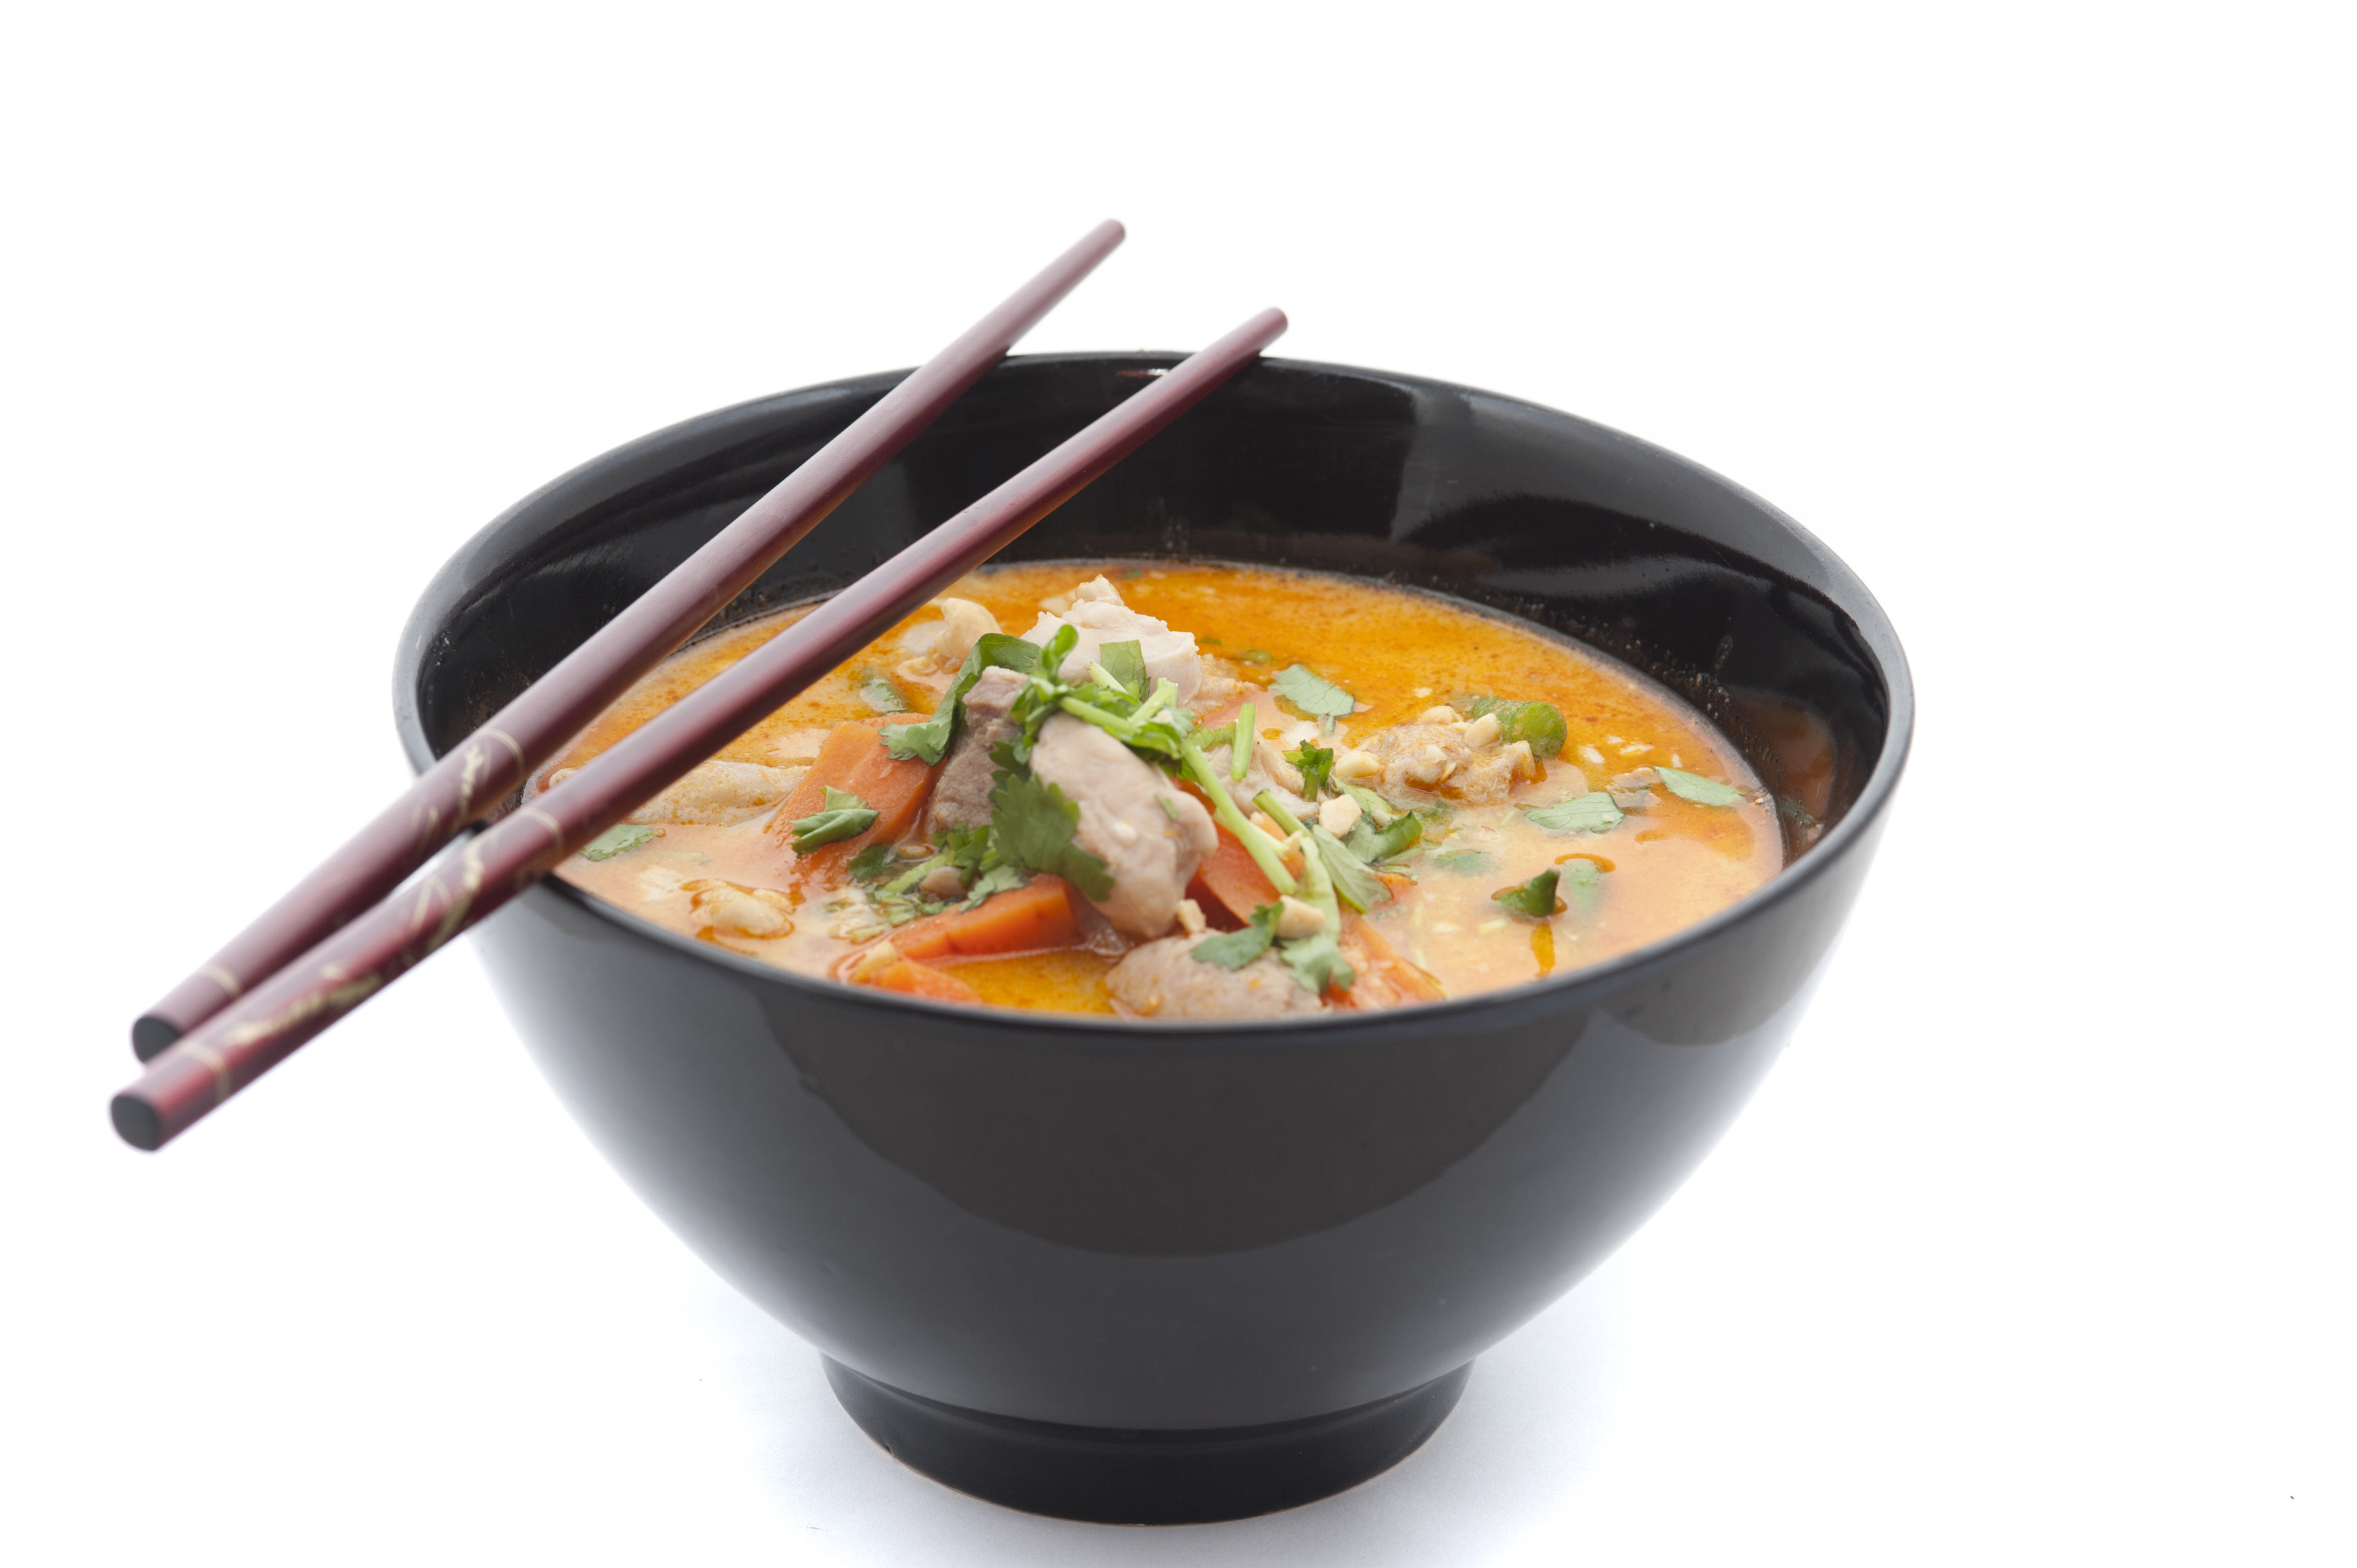 creamy soup in bowl with chopsticks - Free Stock Image